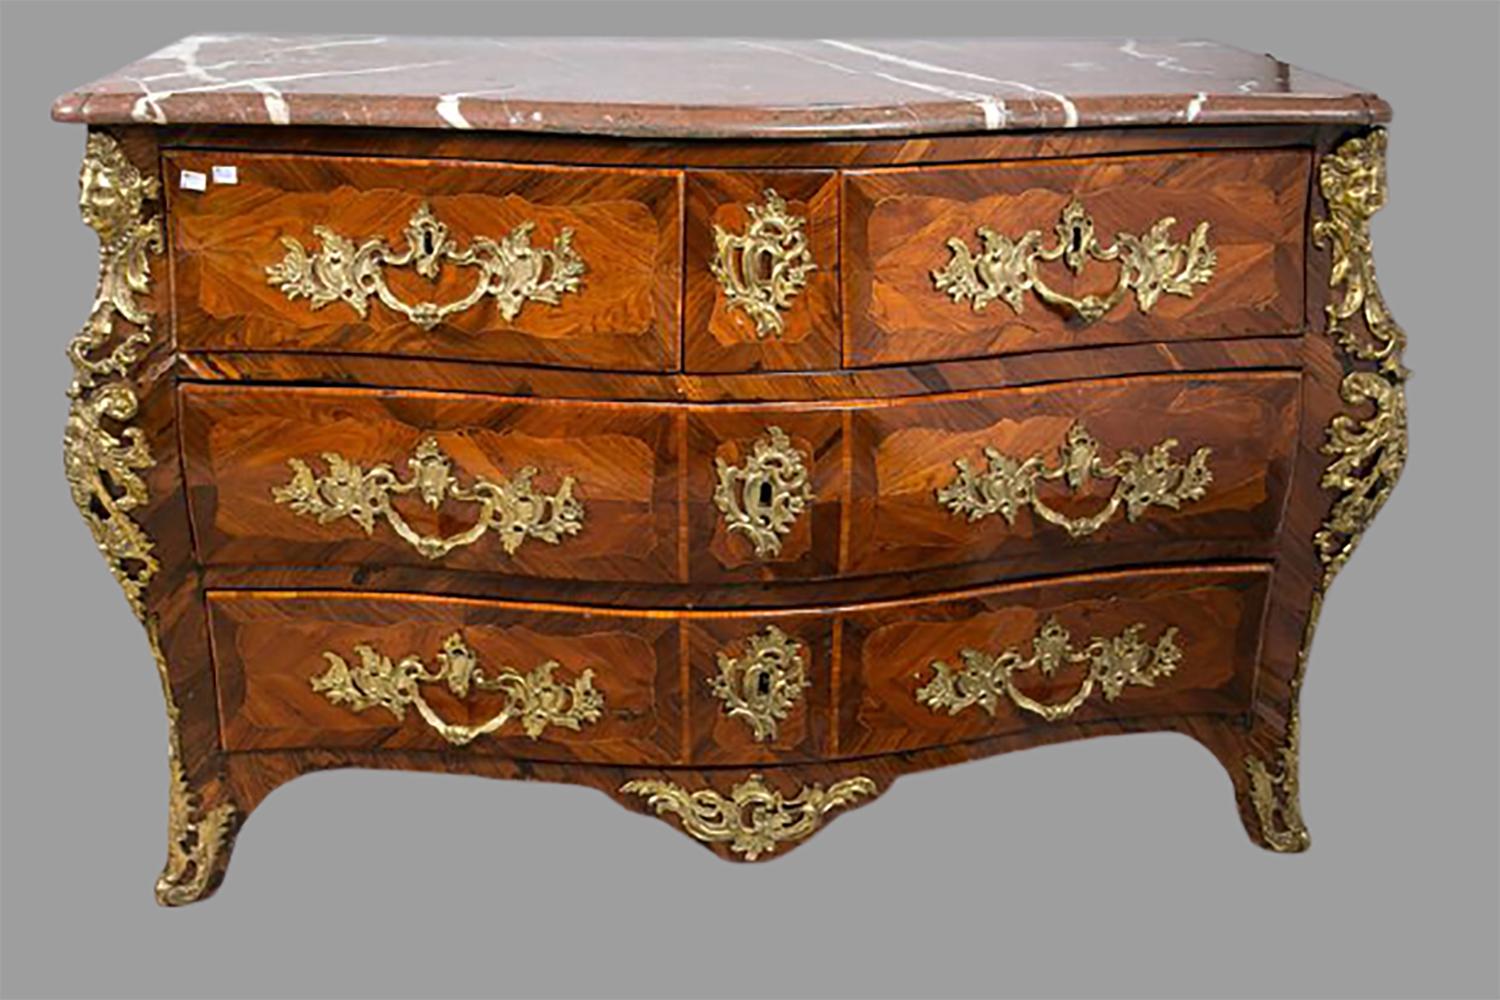 18th century marble-top three-drawer Regence commode. This spectacular Regence commode has a case that is signed L. Dumay in three different places. Having satinwood kings wood veneers this outstanding commode has a solid wood bombe case with full